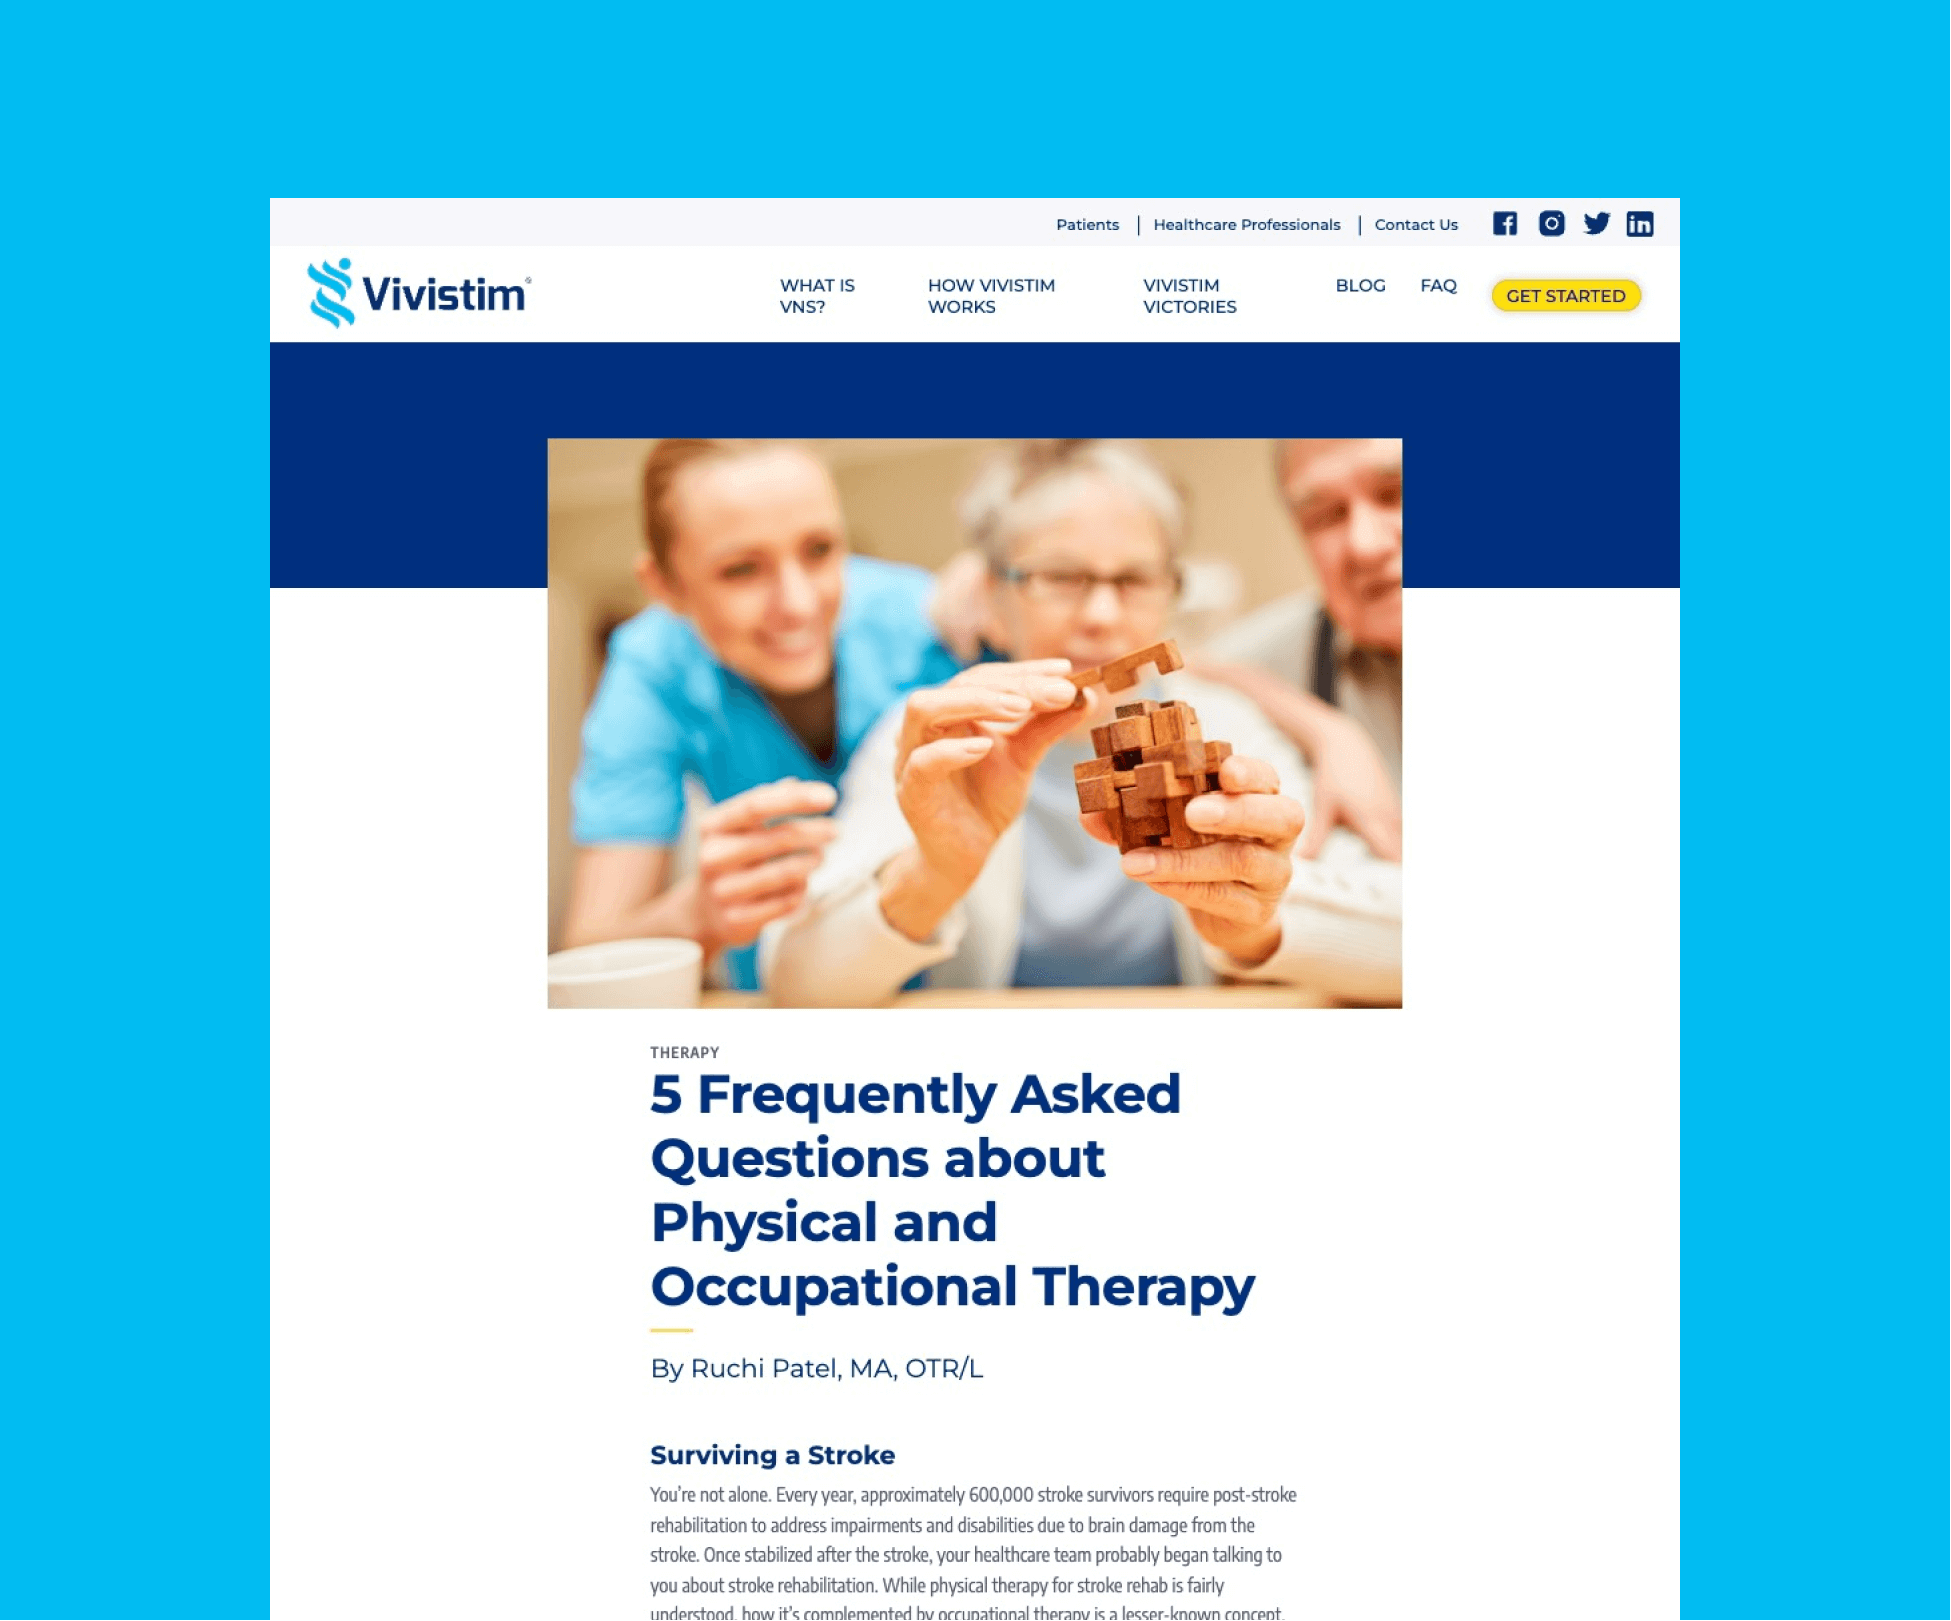 One of Vivistim's webpages featuring frequently asked questions